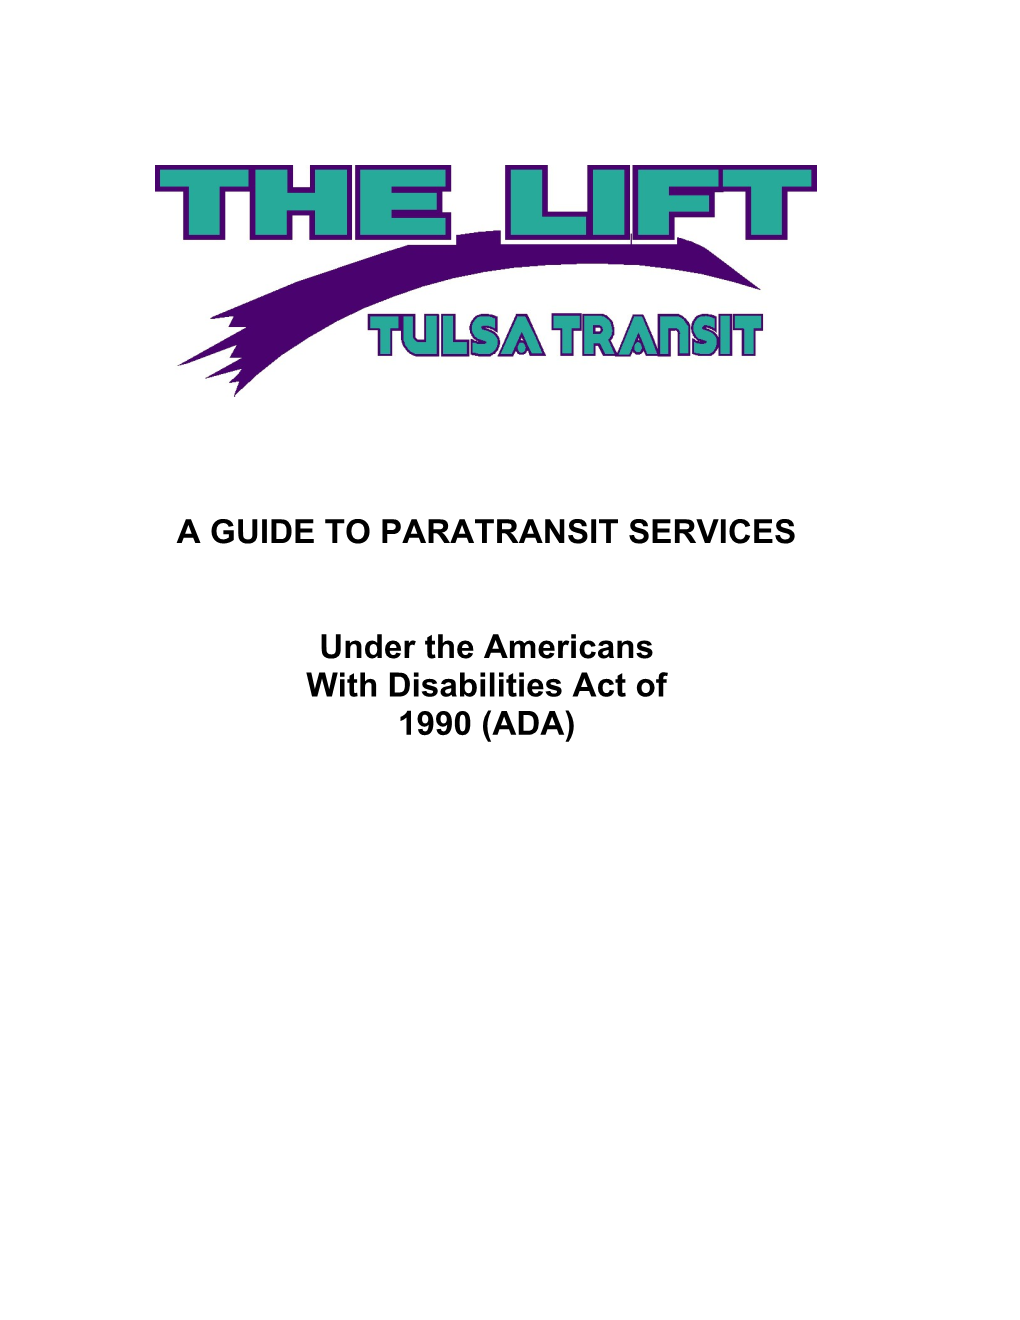 A Guide to Paratransit Services